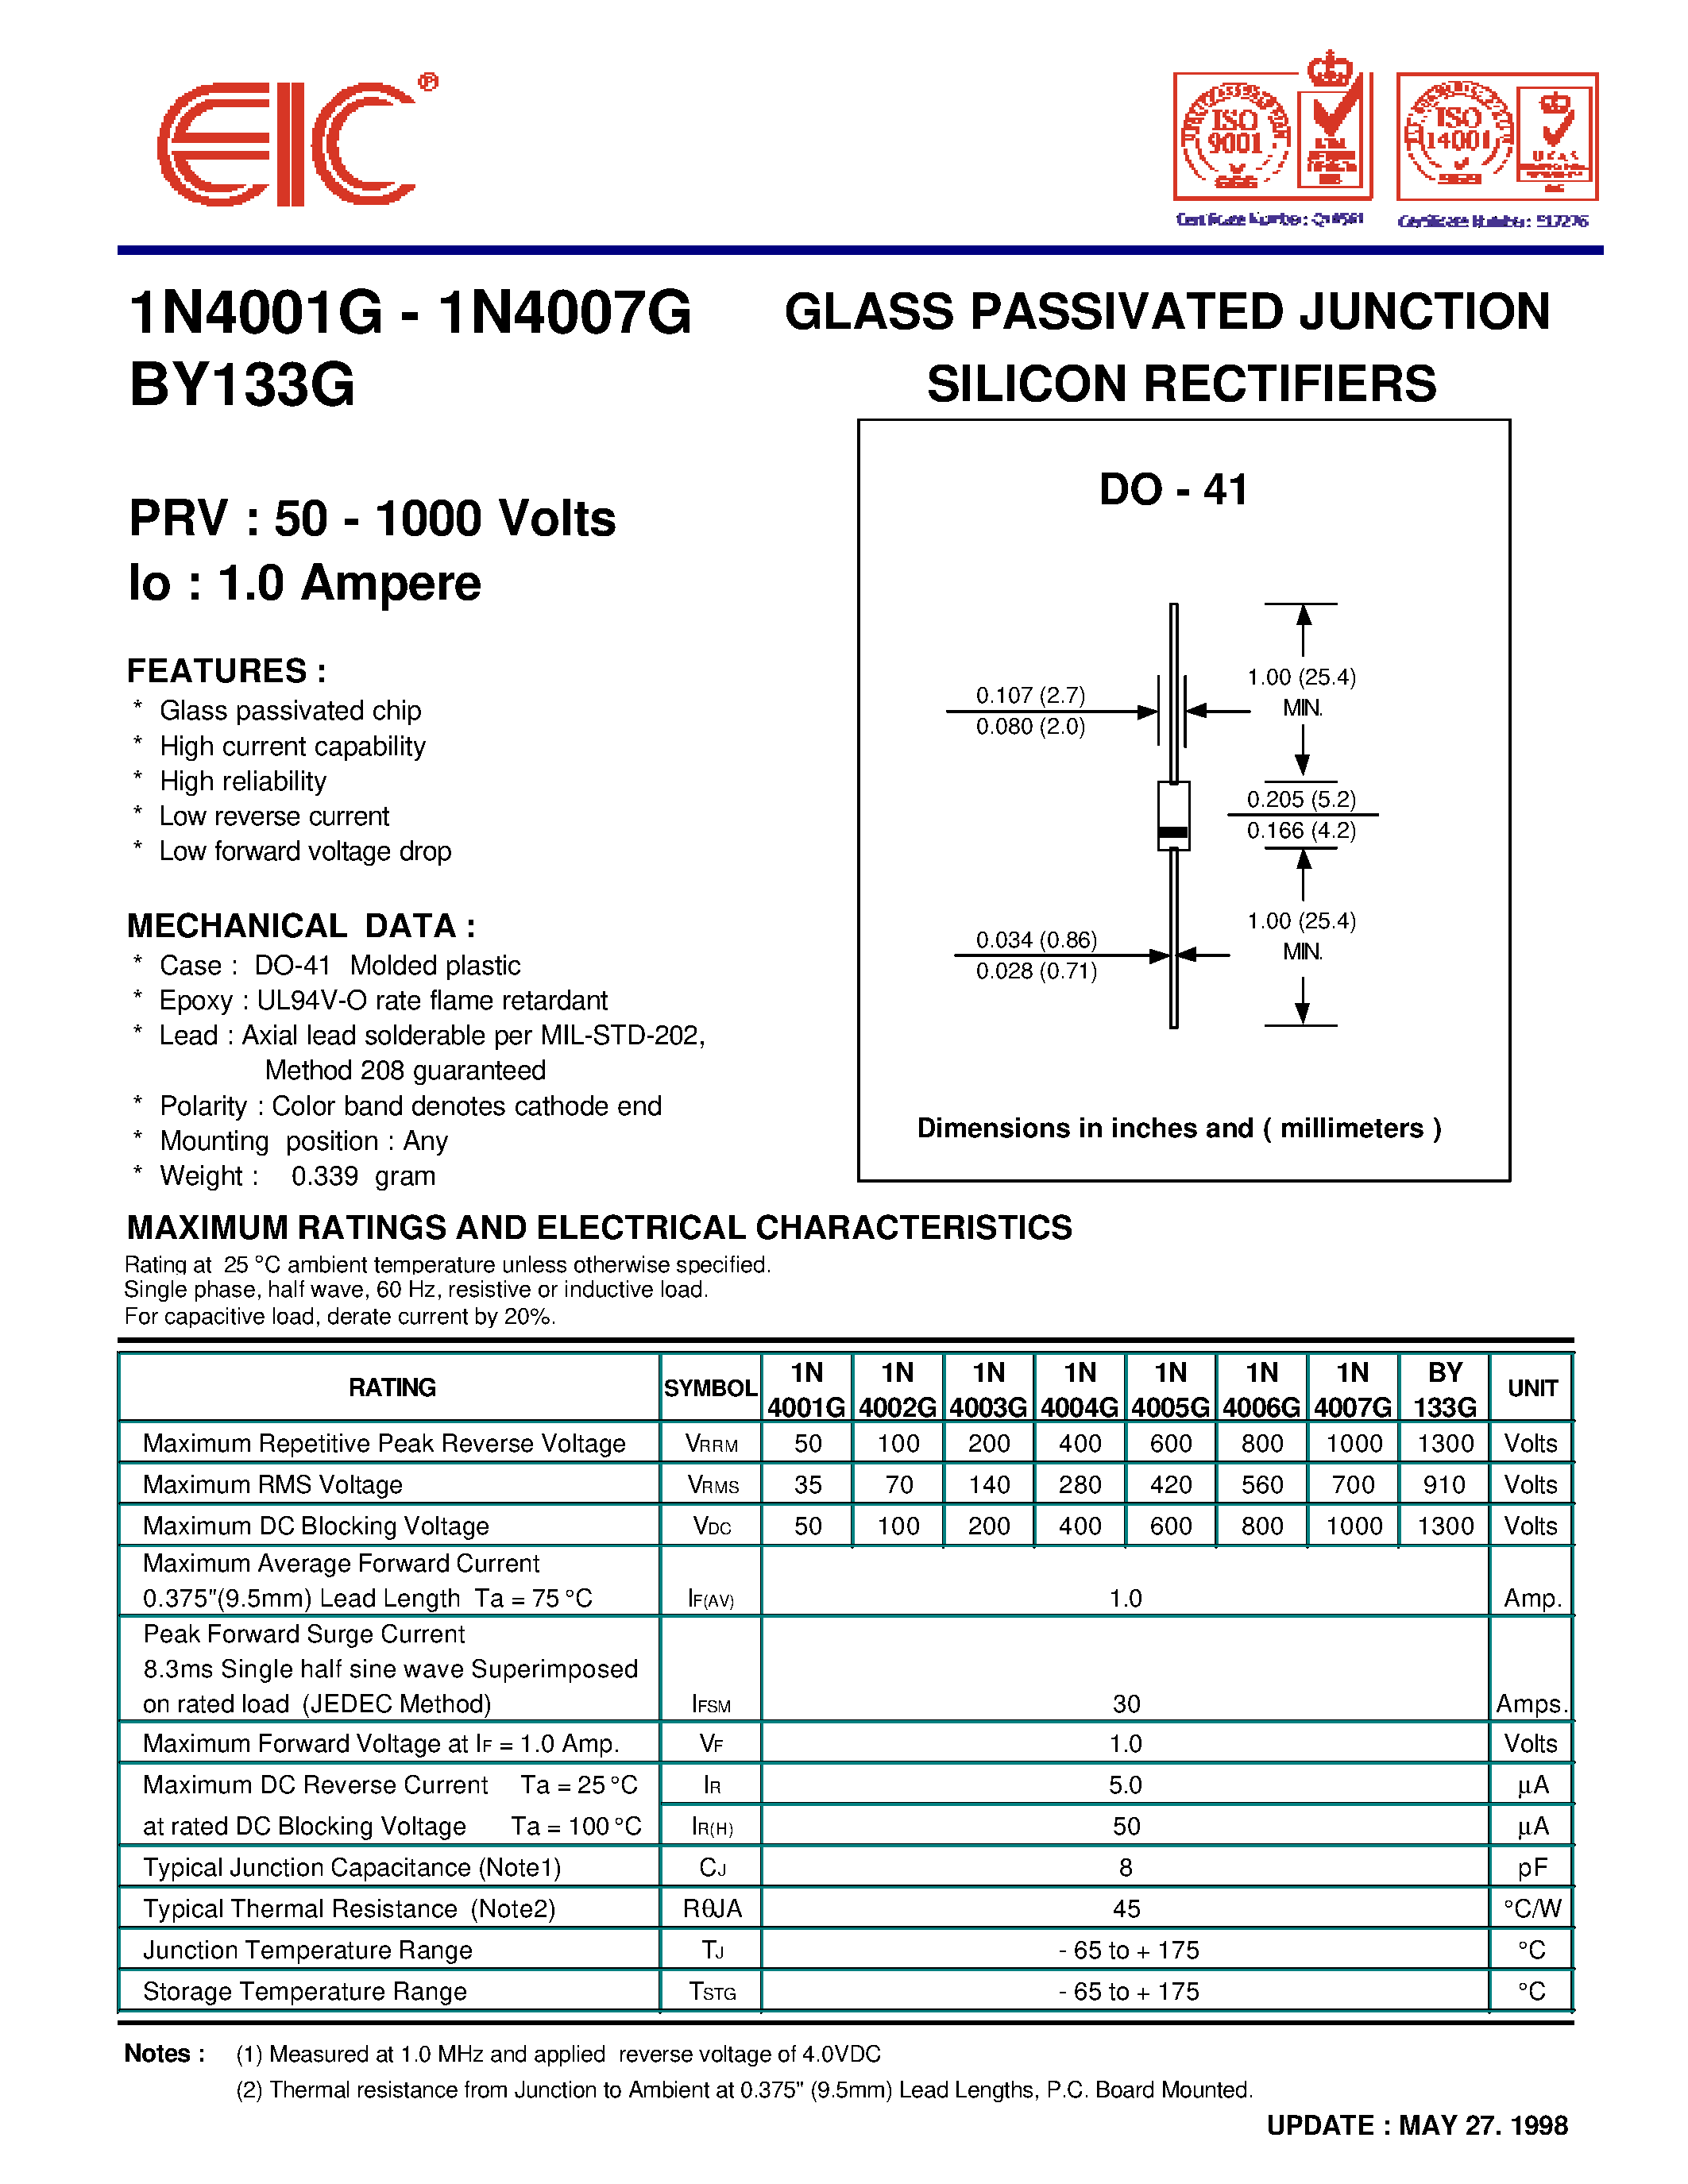 Даташит BY133G - GLASS PASSIVATED JUNCTION SILICON RECTIFIERS страница 1